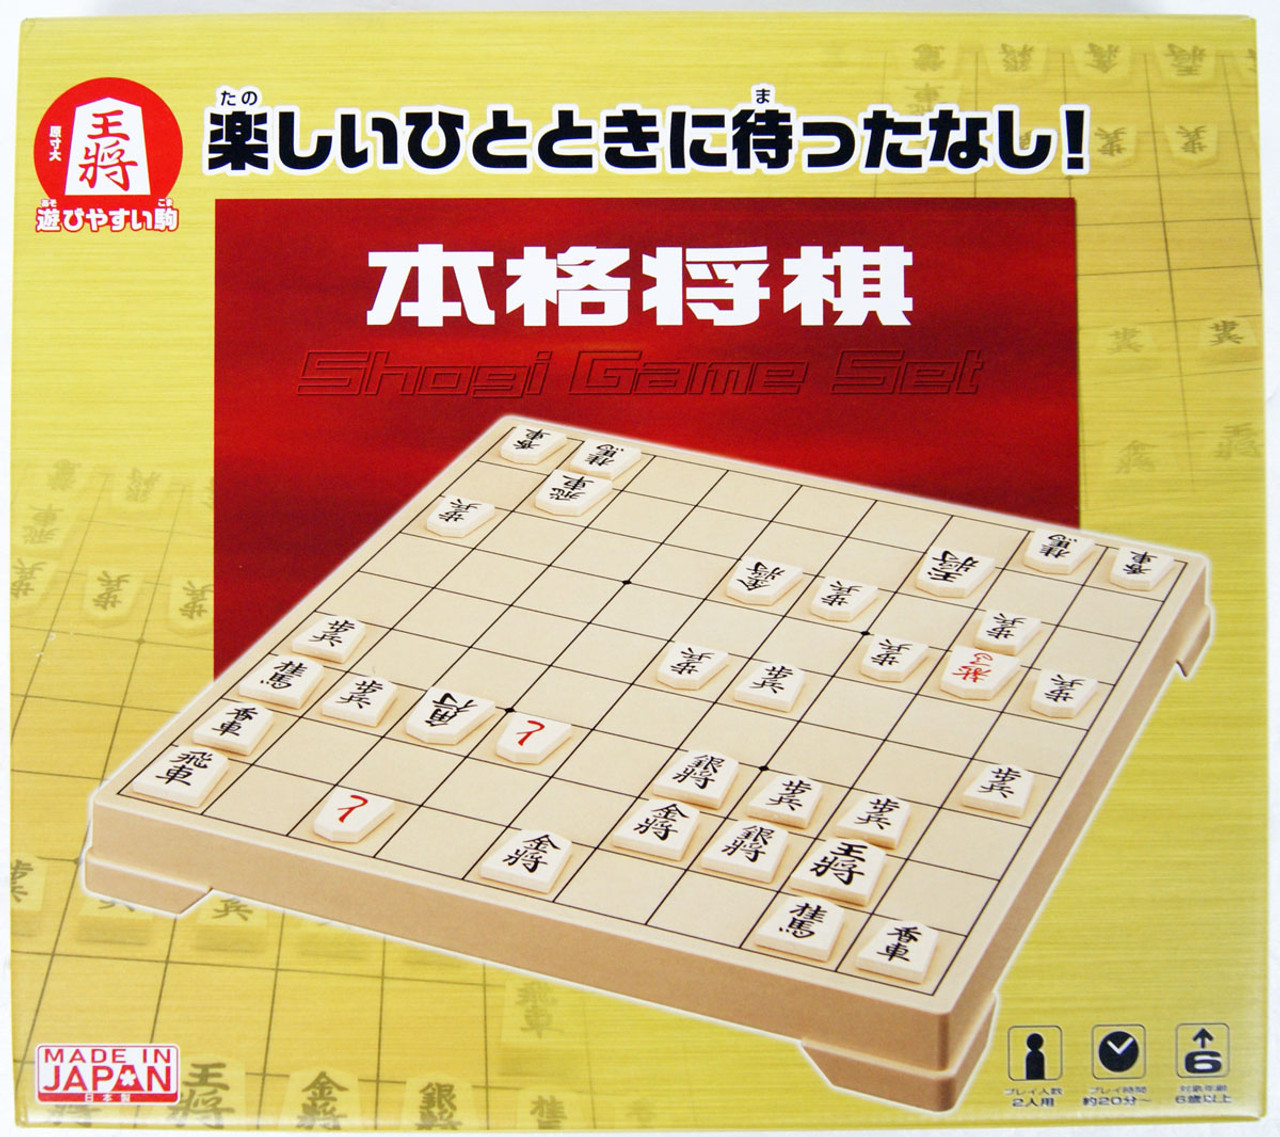 What is Shogi? — The appeal of Japanese Chess